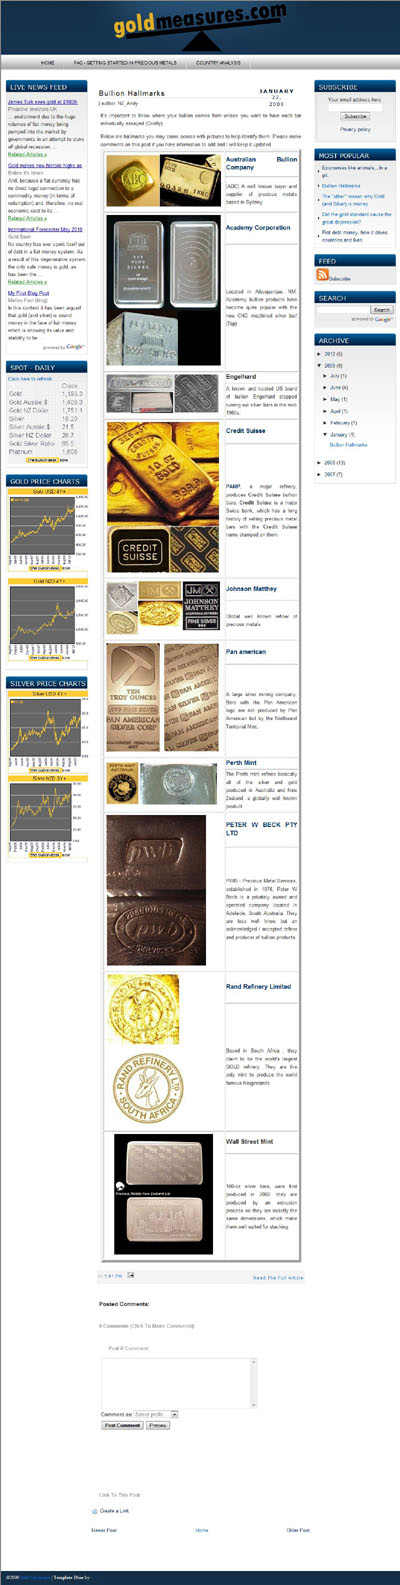 Gold Measures Sell Your Gold Coins Page